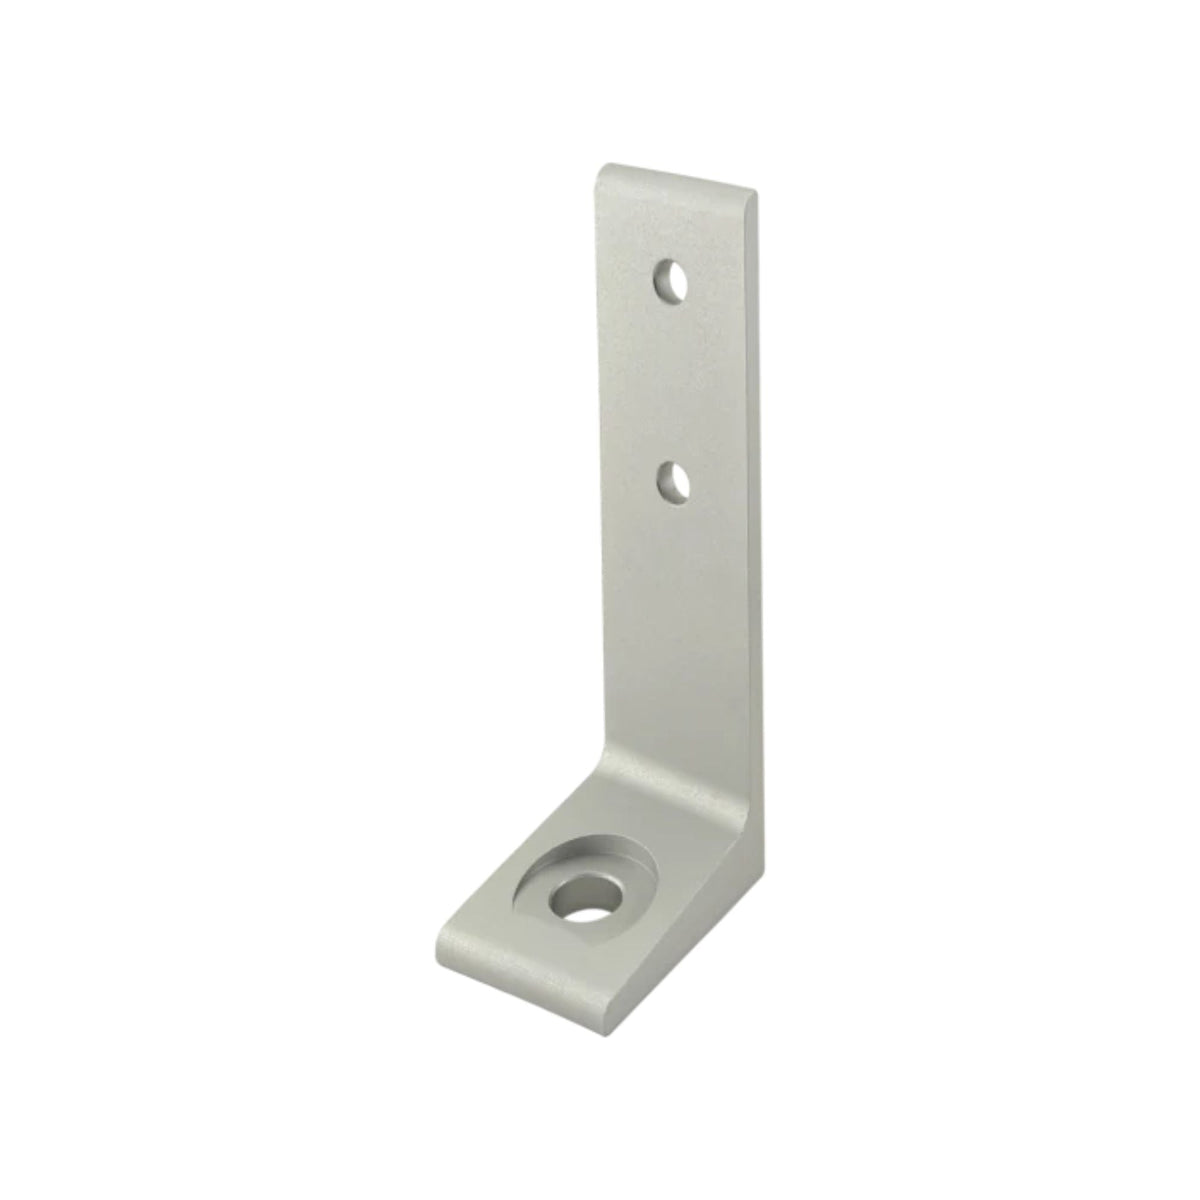 L-shaped corner plate with one short side with a mounting hole and one long side with two mounting holes